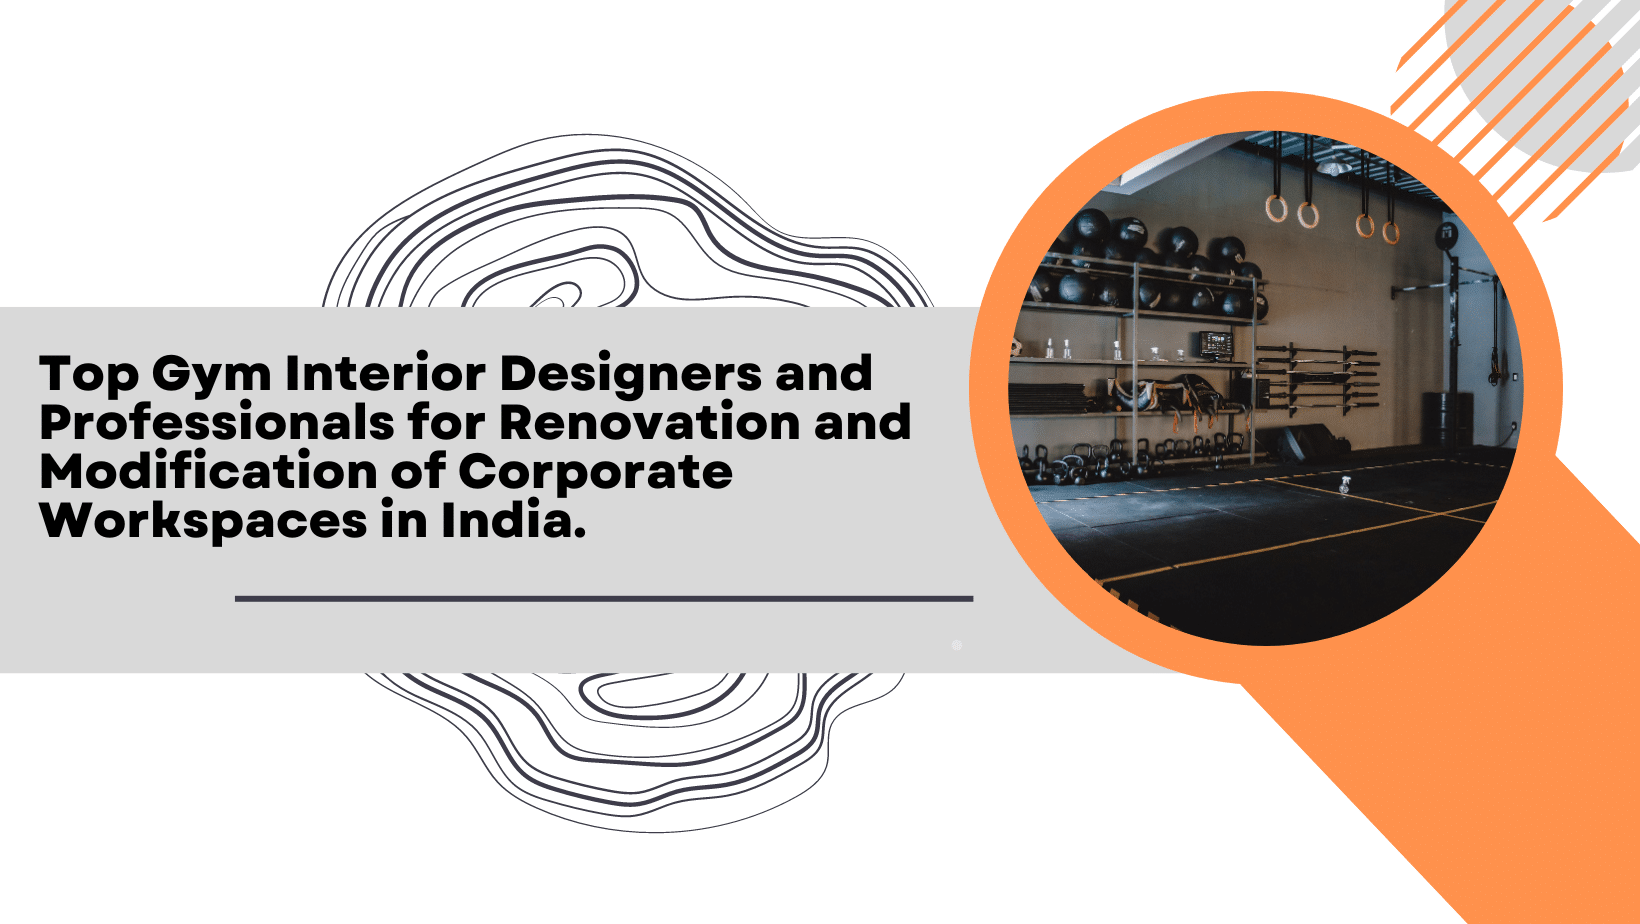 Top Gym Interior Designers and Professionals for Renovation and Modification of Corporate Workspaces in India